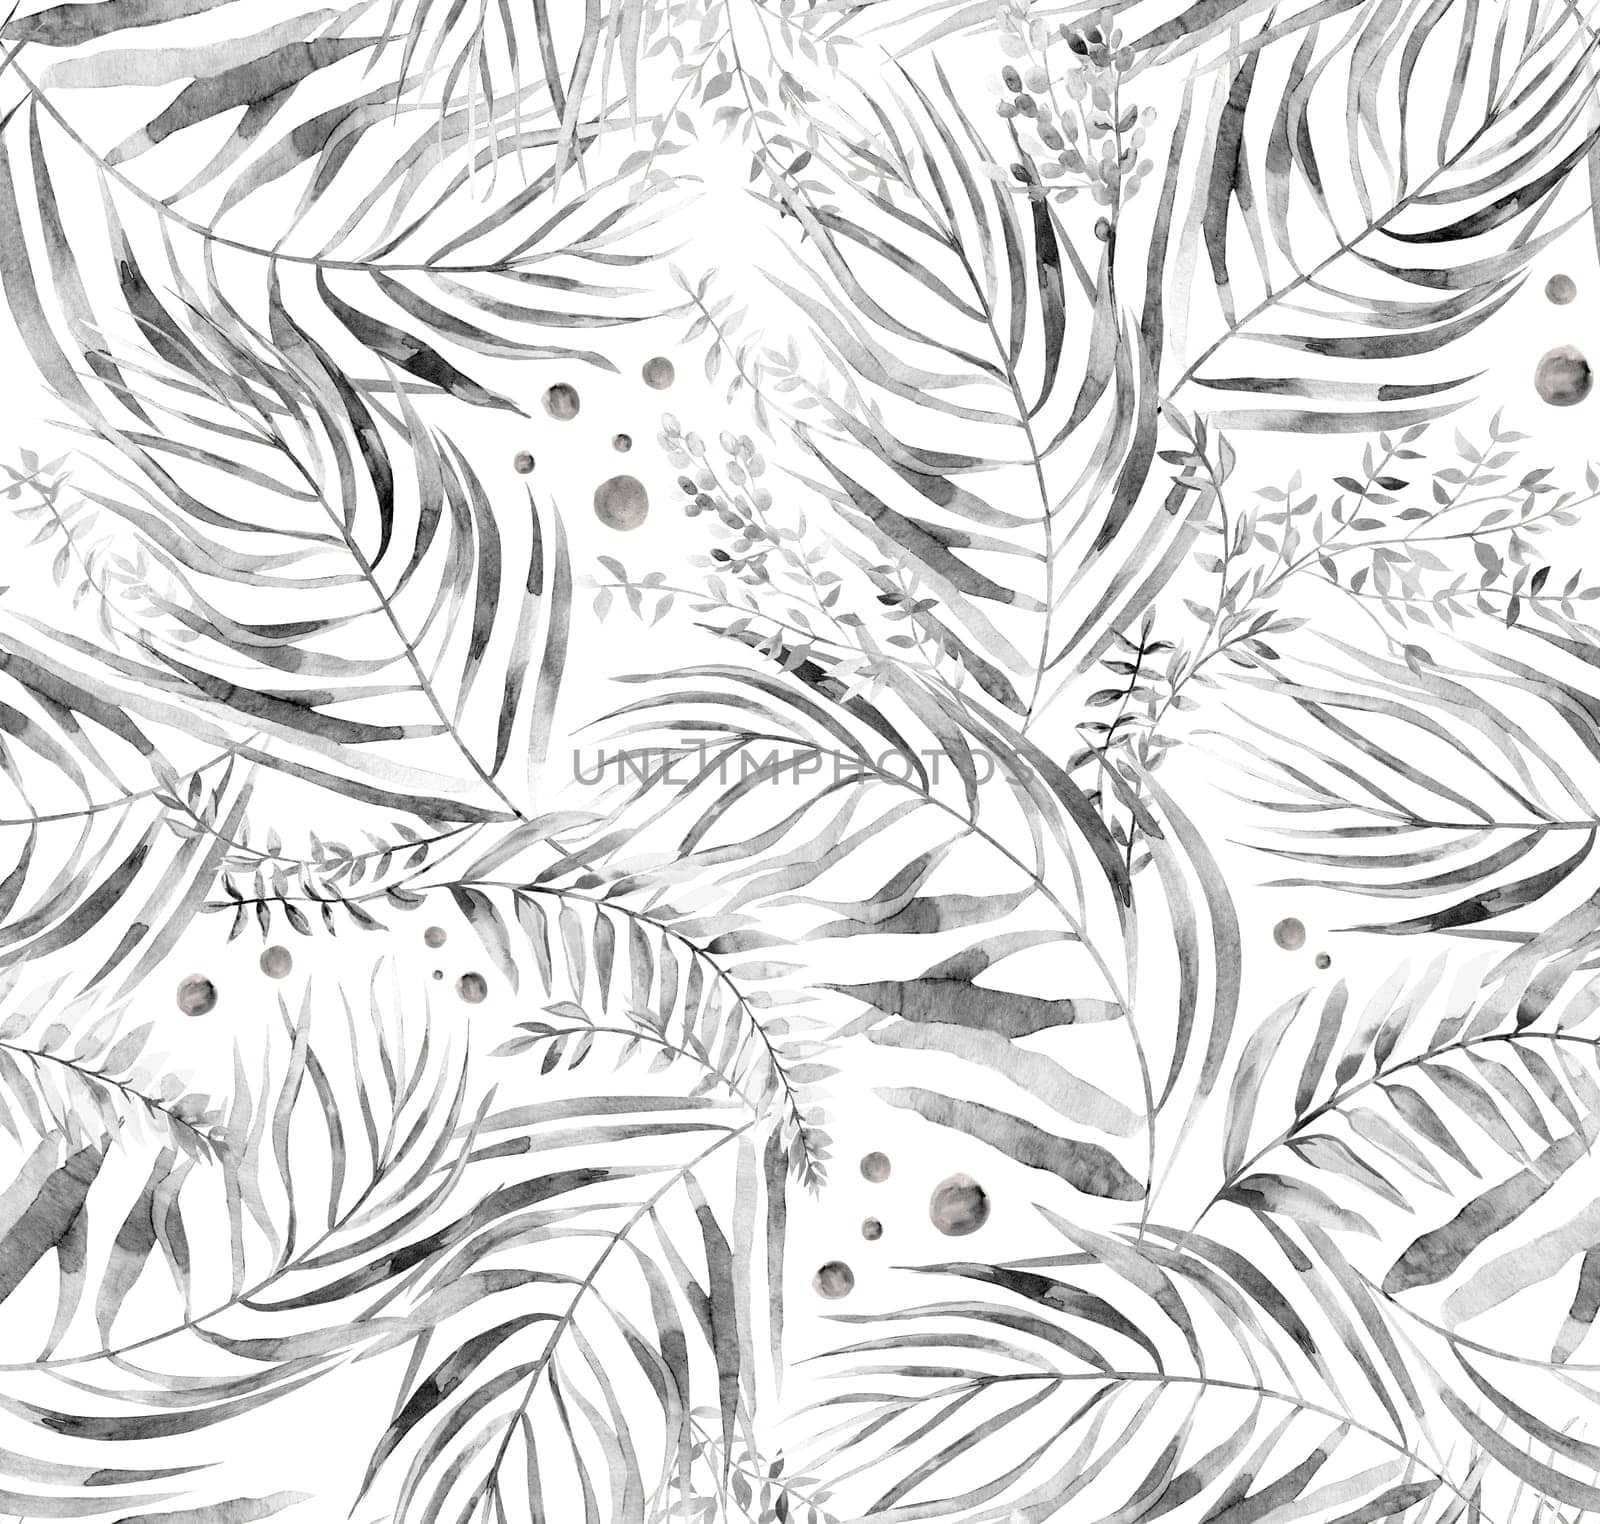 Monochrome watercolor seamless pattern with herbarium of flowers and tropical palm leaves by MarinaVoyush